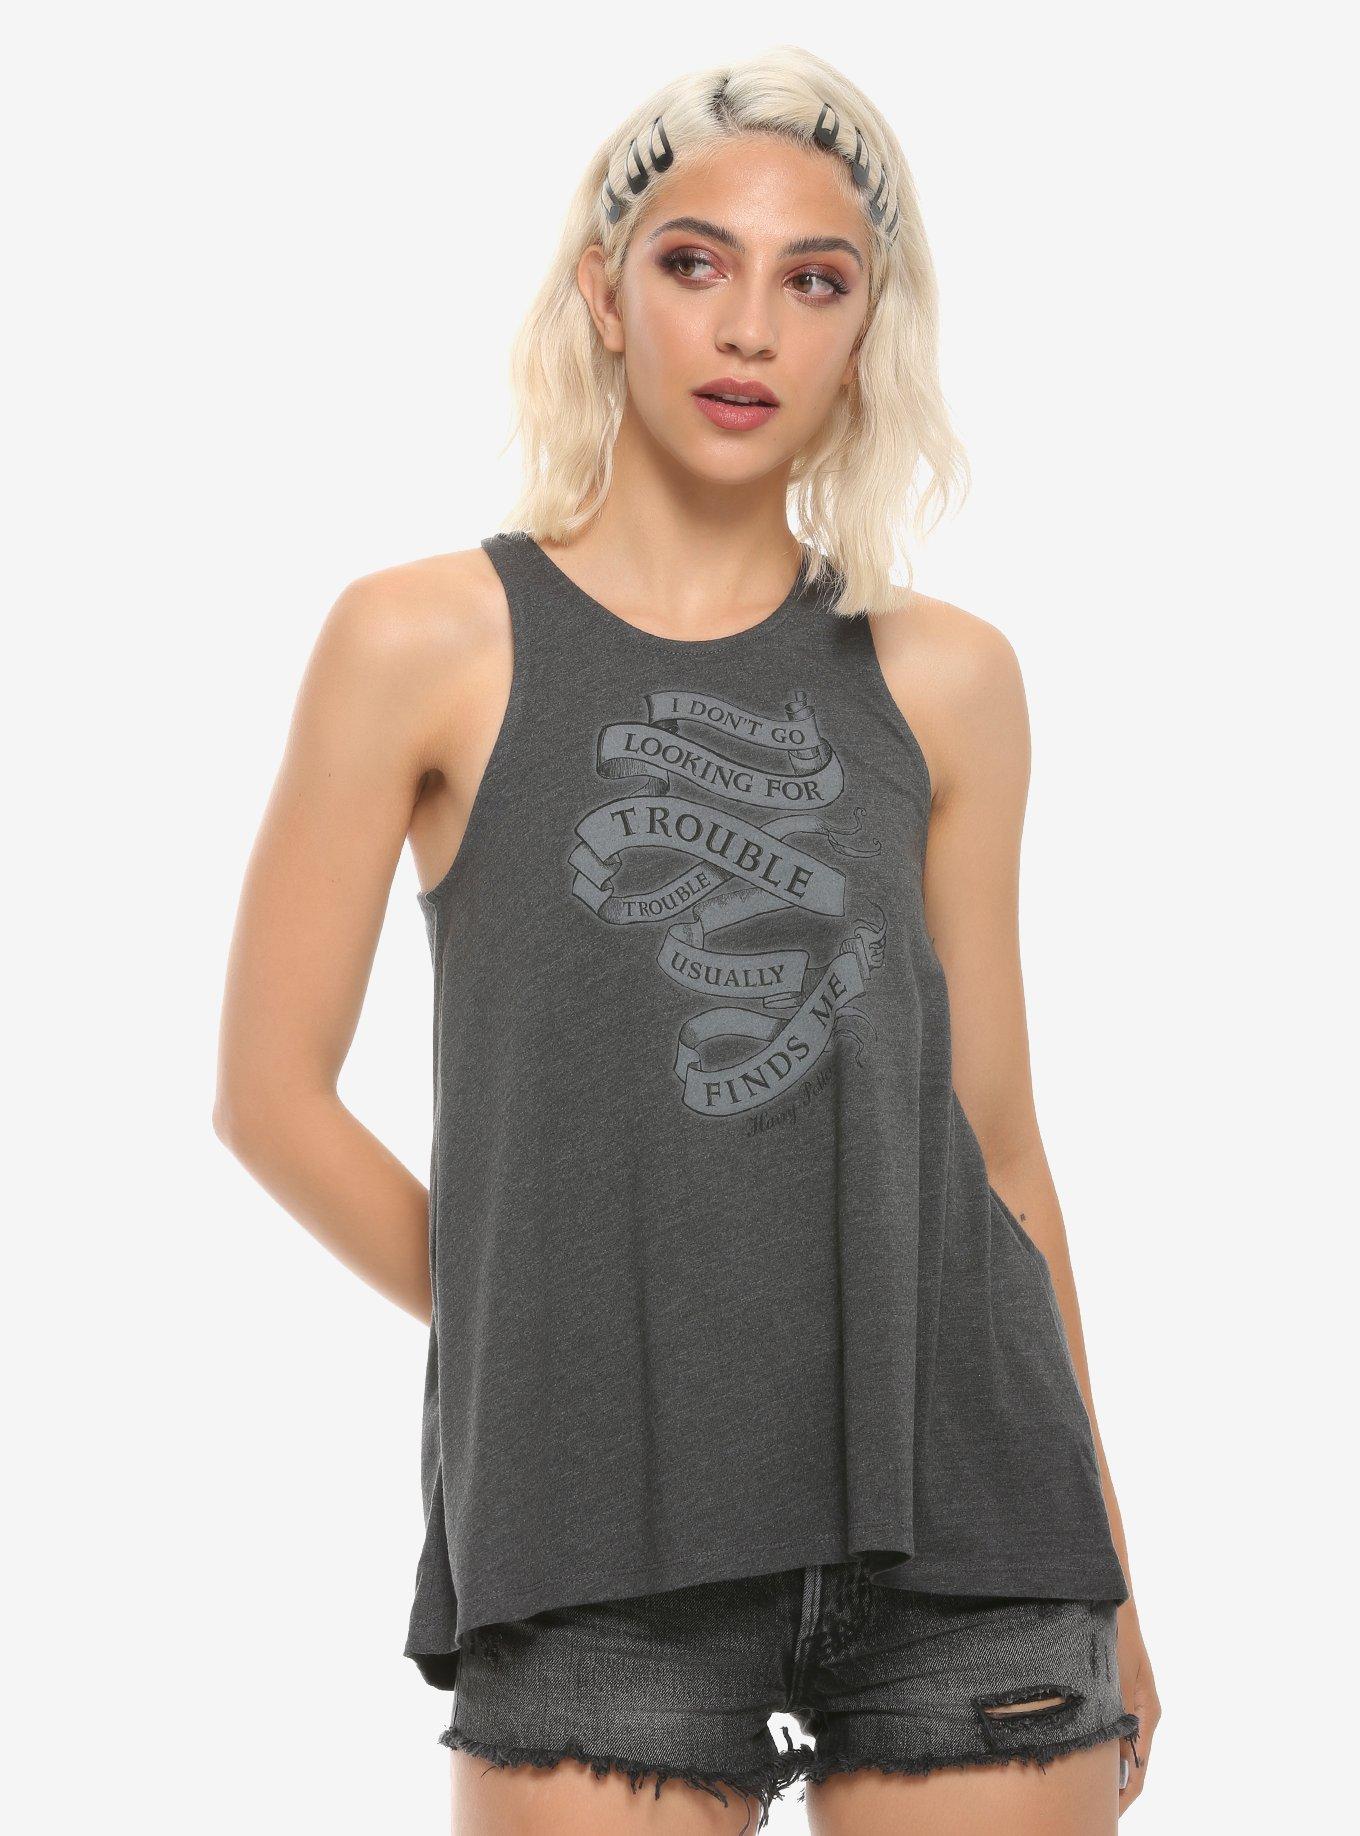 Harry Potter I Don't Go Looking For Trouble Girls Tank Top, GREY, hi-res